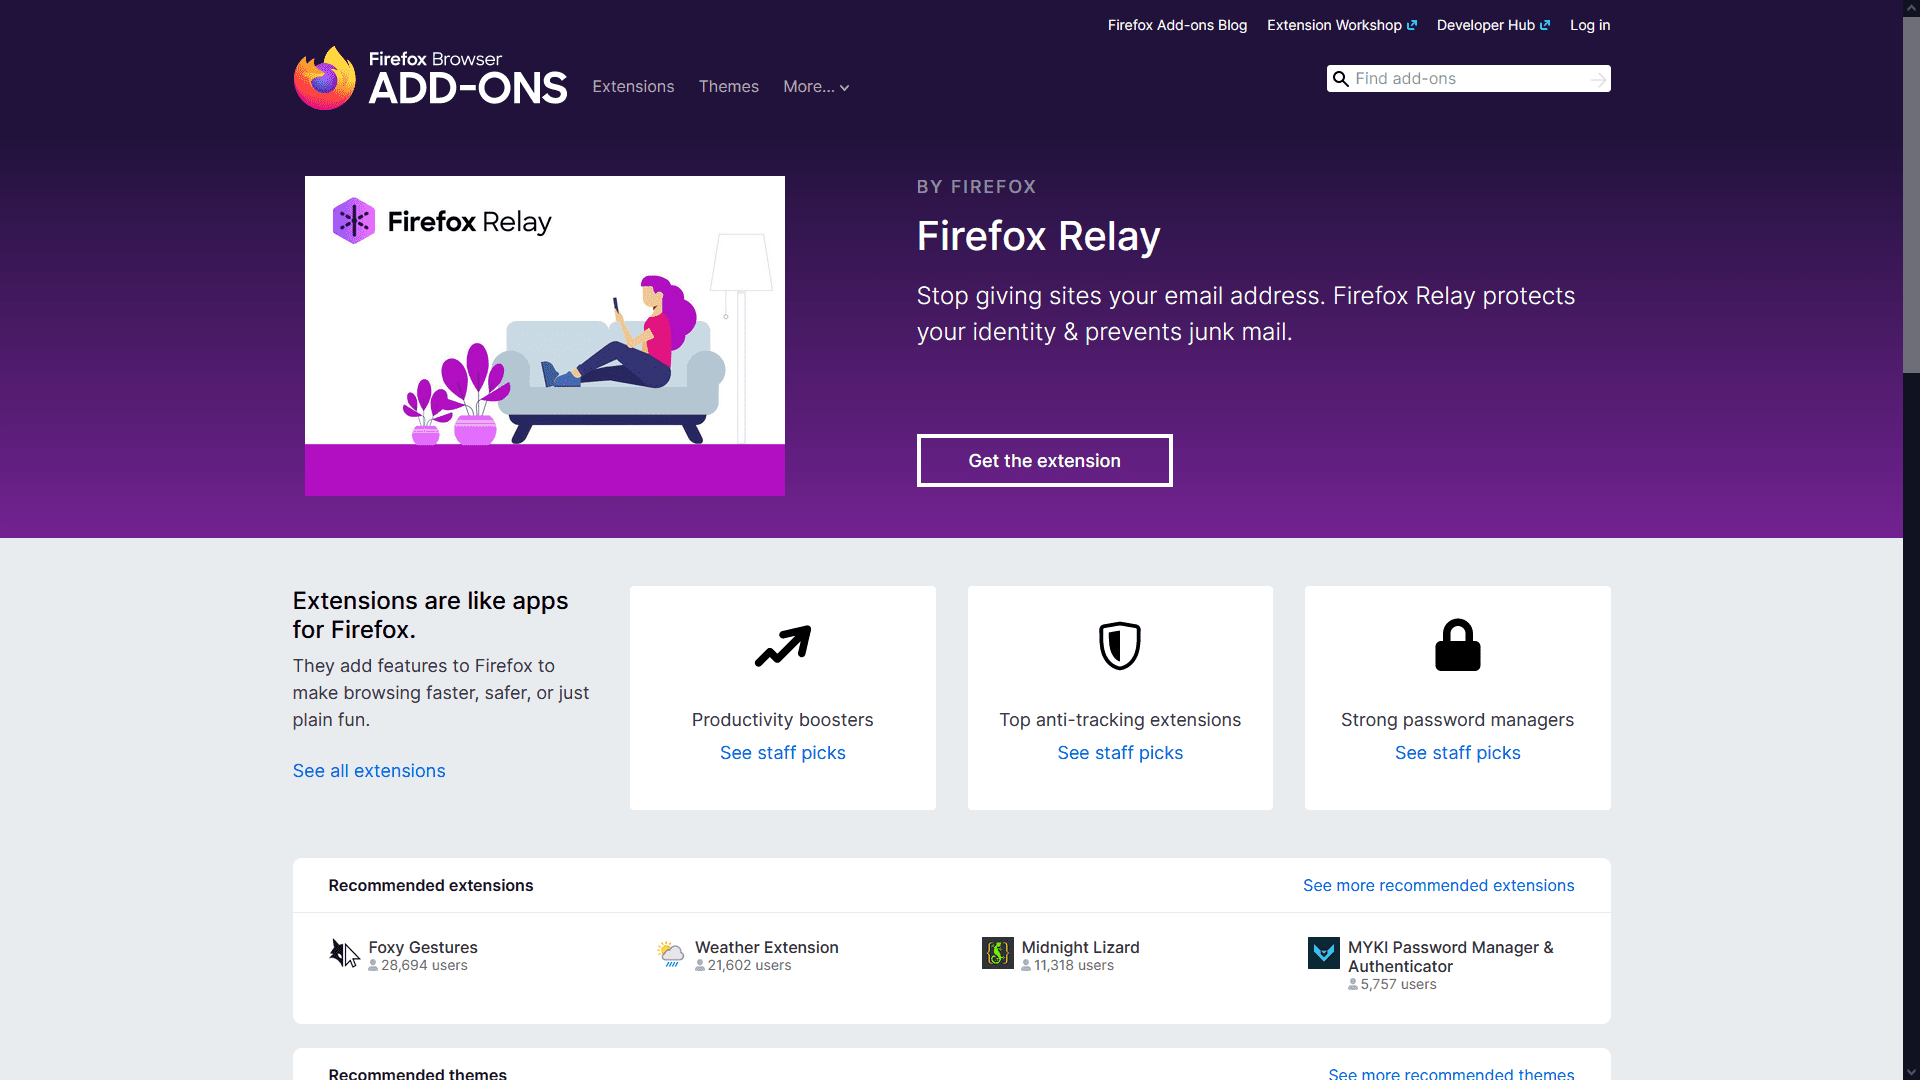 The 18 Best Firefox Quantum Extensions